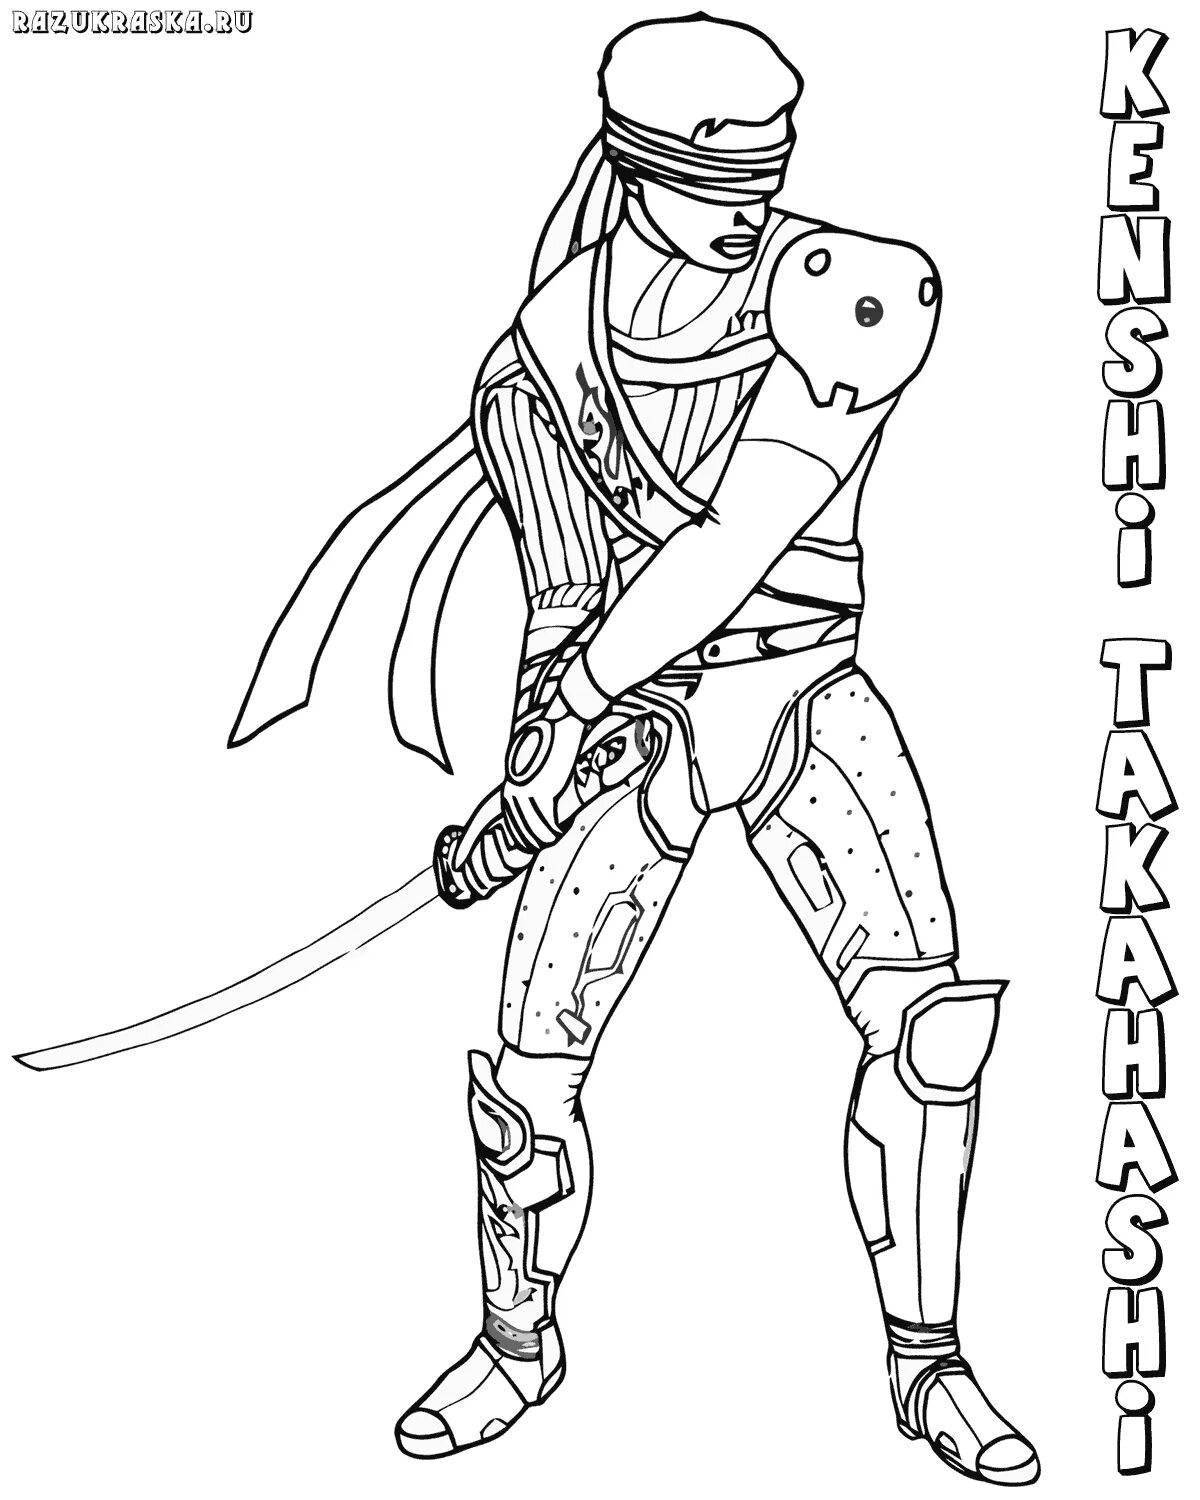 Dynamic motorcycle battalion coloring page